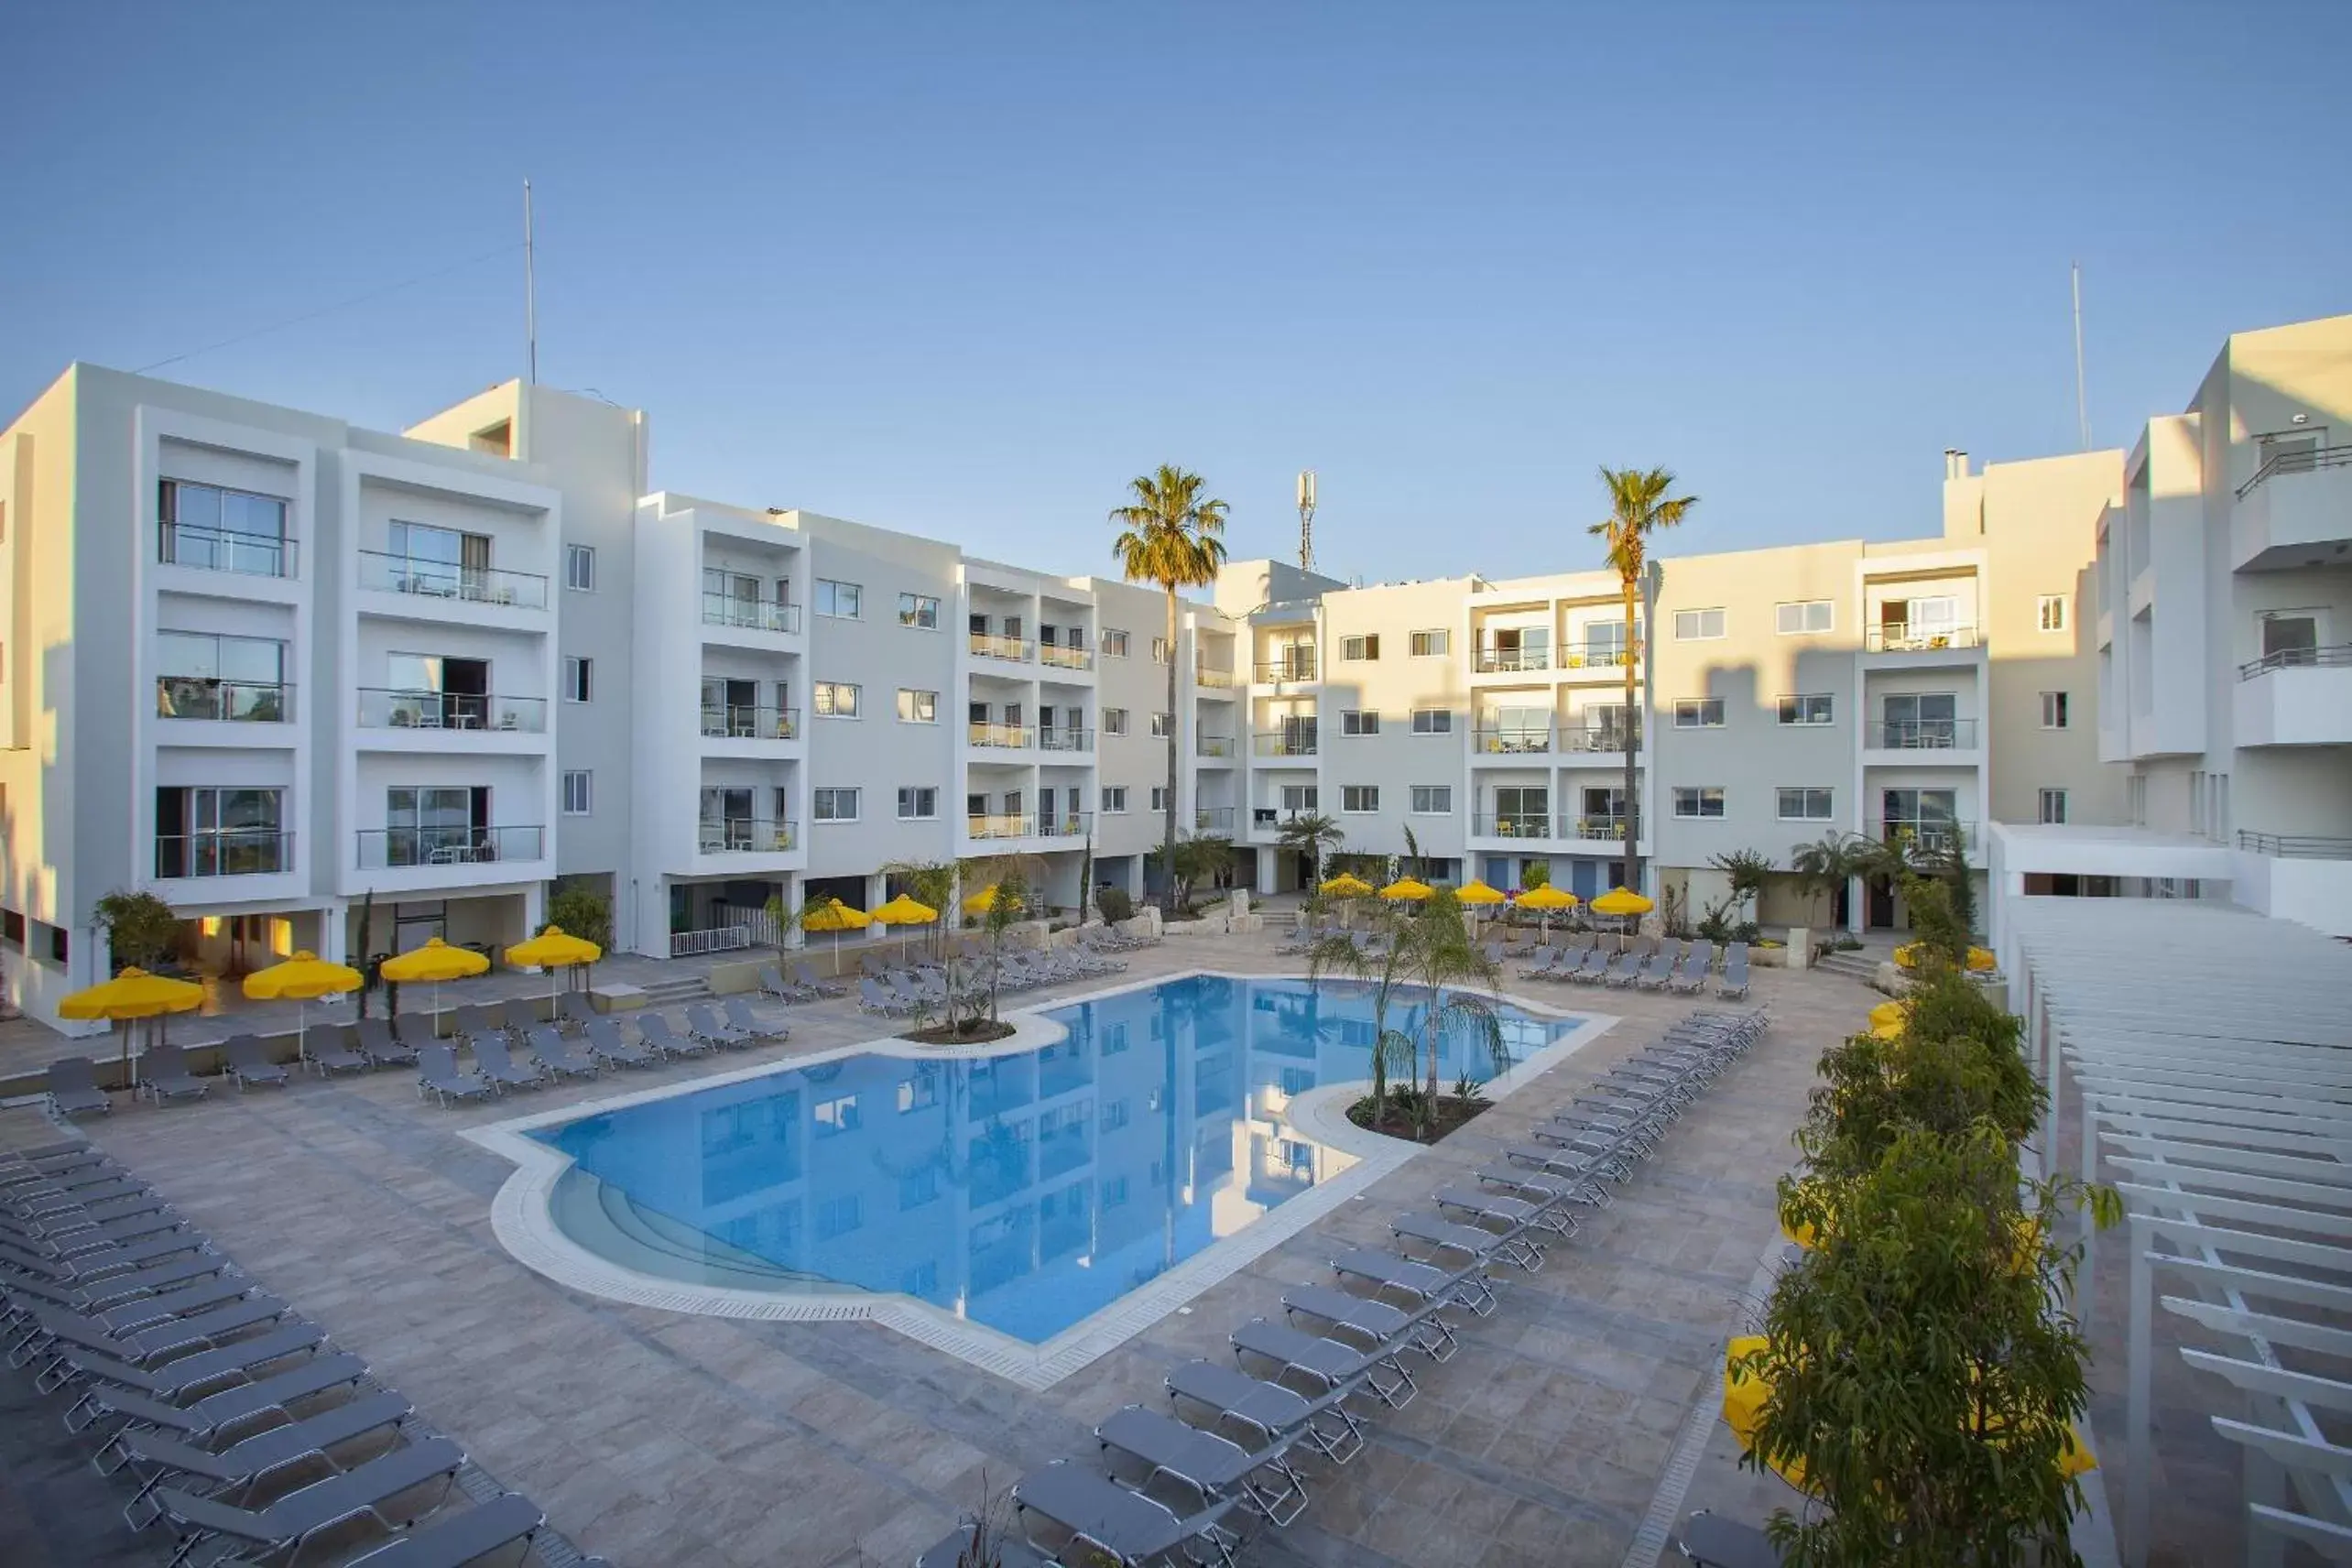 Property building, Swimming Pool in Mayfair Hotel formerly Smartline Paphos